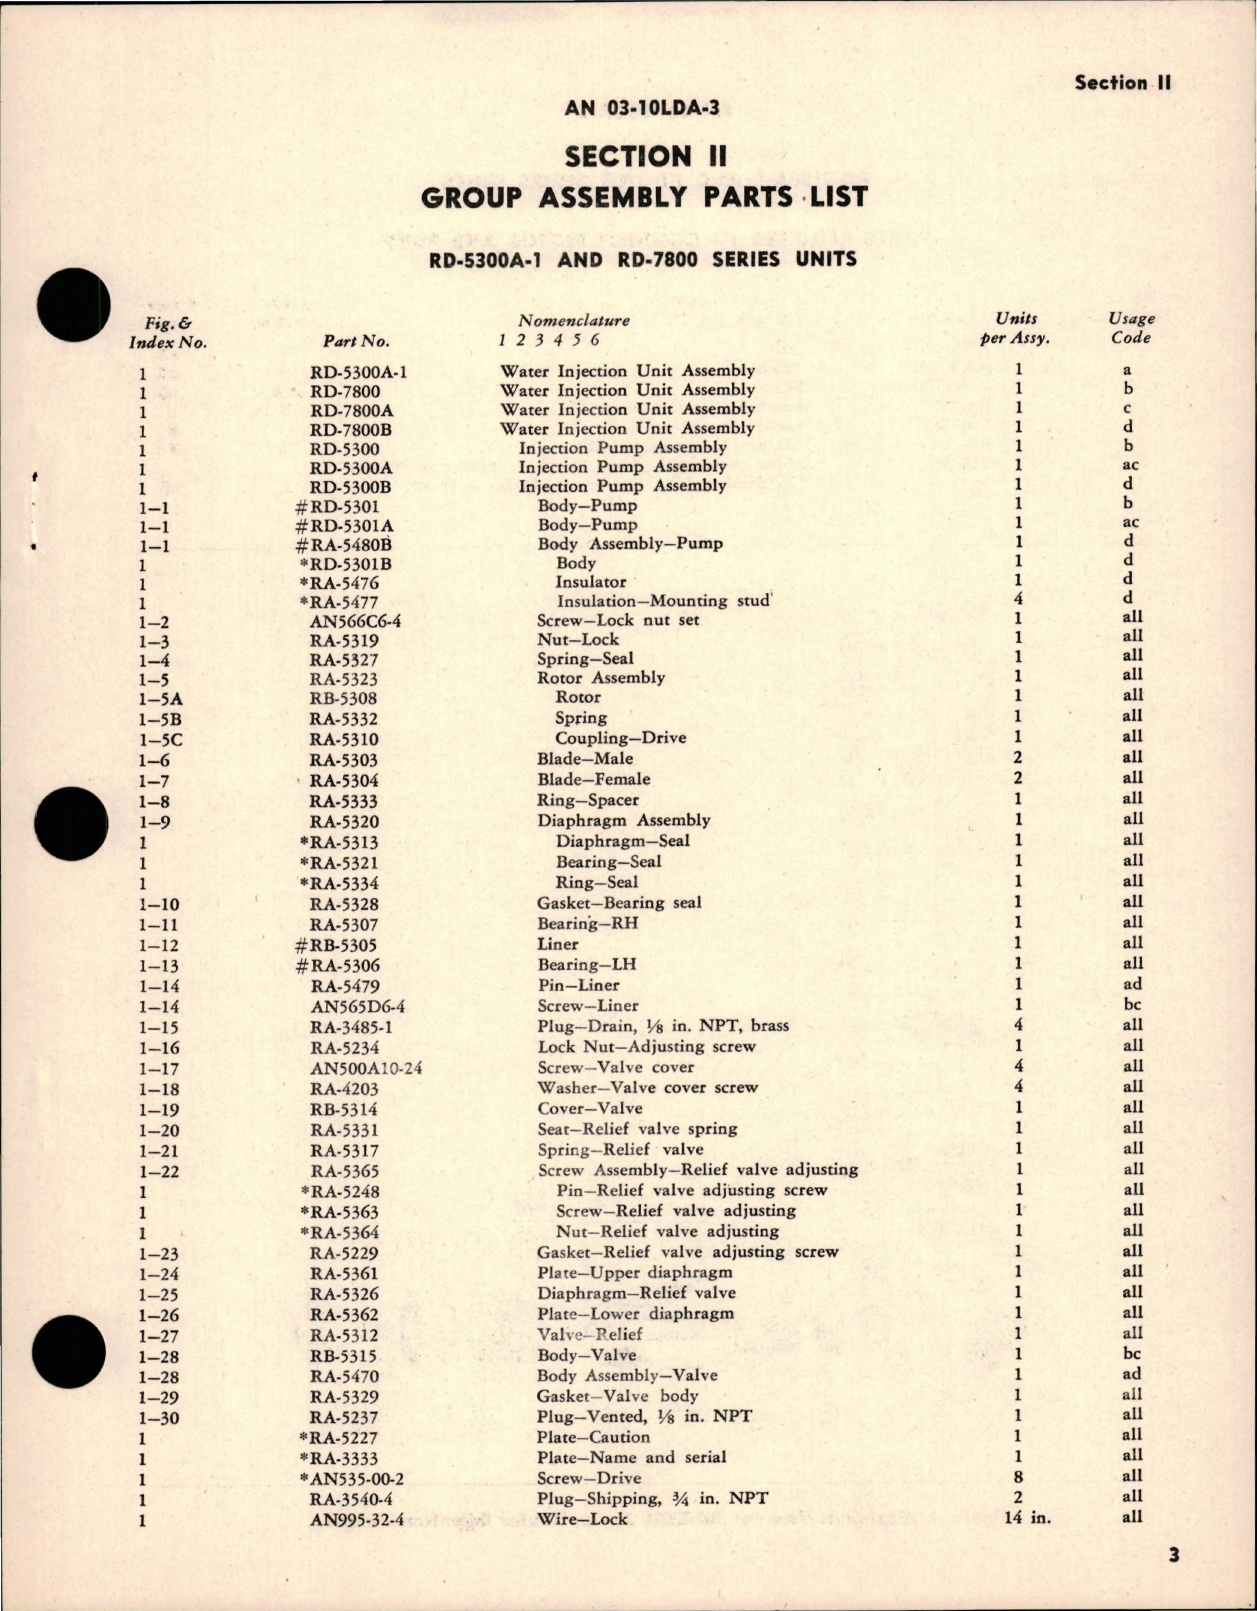 Sample page 5 from AirCorps Library document: Parts Catalog for Line Type Water Injection Units 